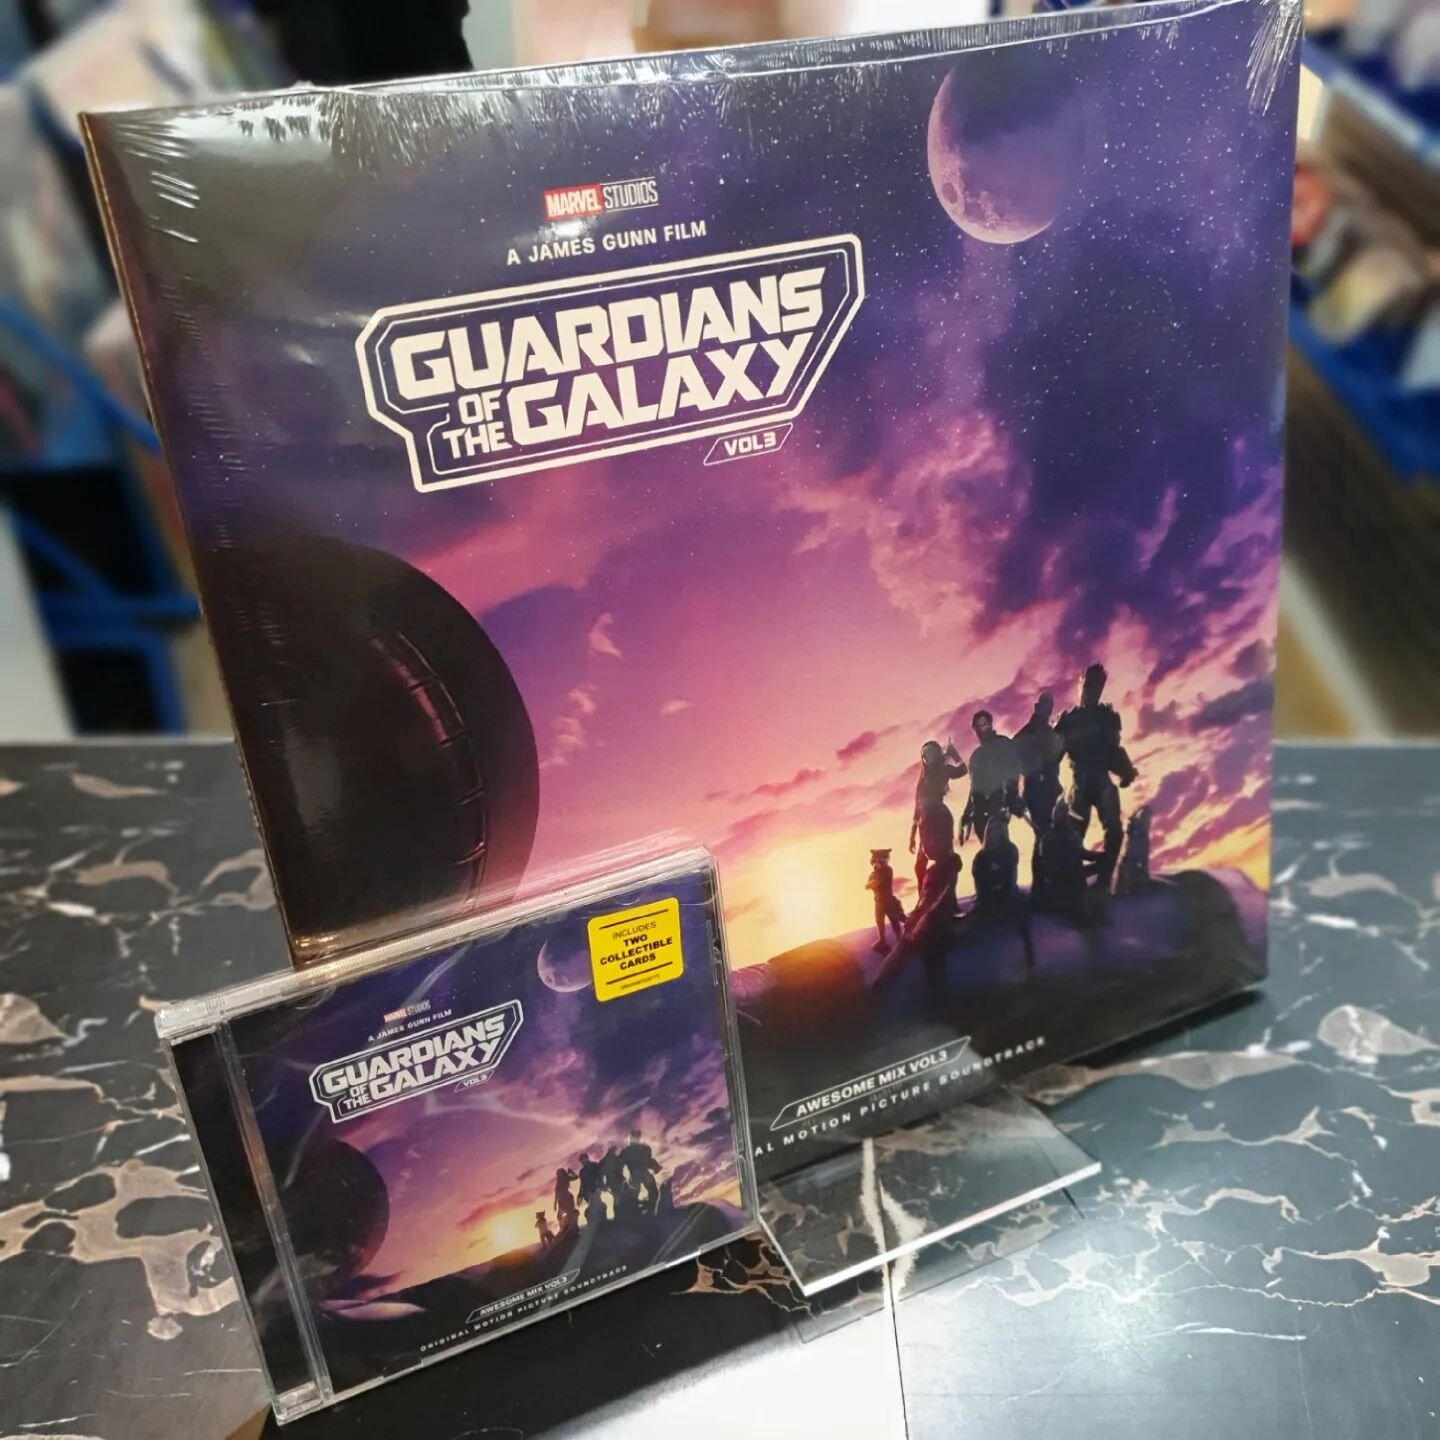 Here's our New Release selection for Friday 5th May:

Guardians of the Galaxy Awesome Mix Volume 3: Original Motion Picture Soundtrack - the eclectic mix you'd expect, including Radiohead, Florence &amp; The Machine, Beastie Boys, Earth Wind &amp; Fi